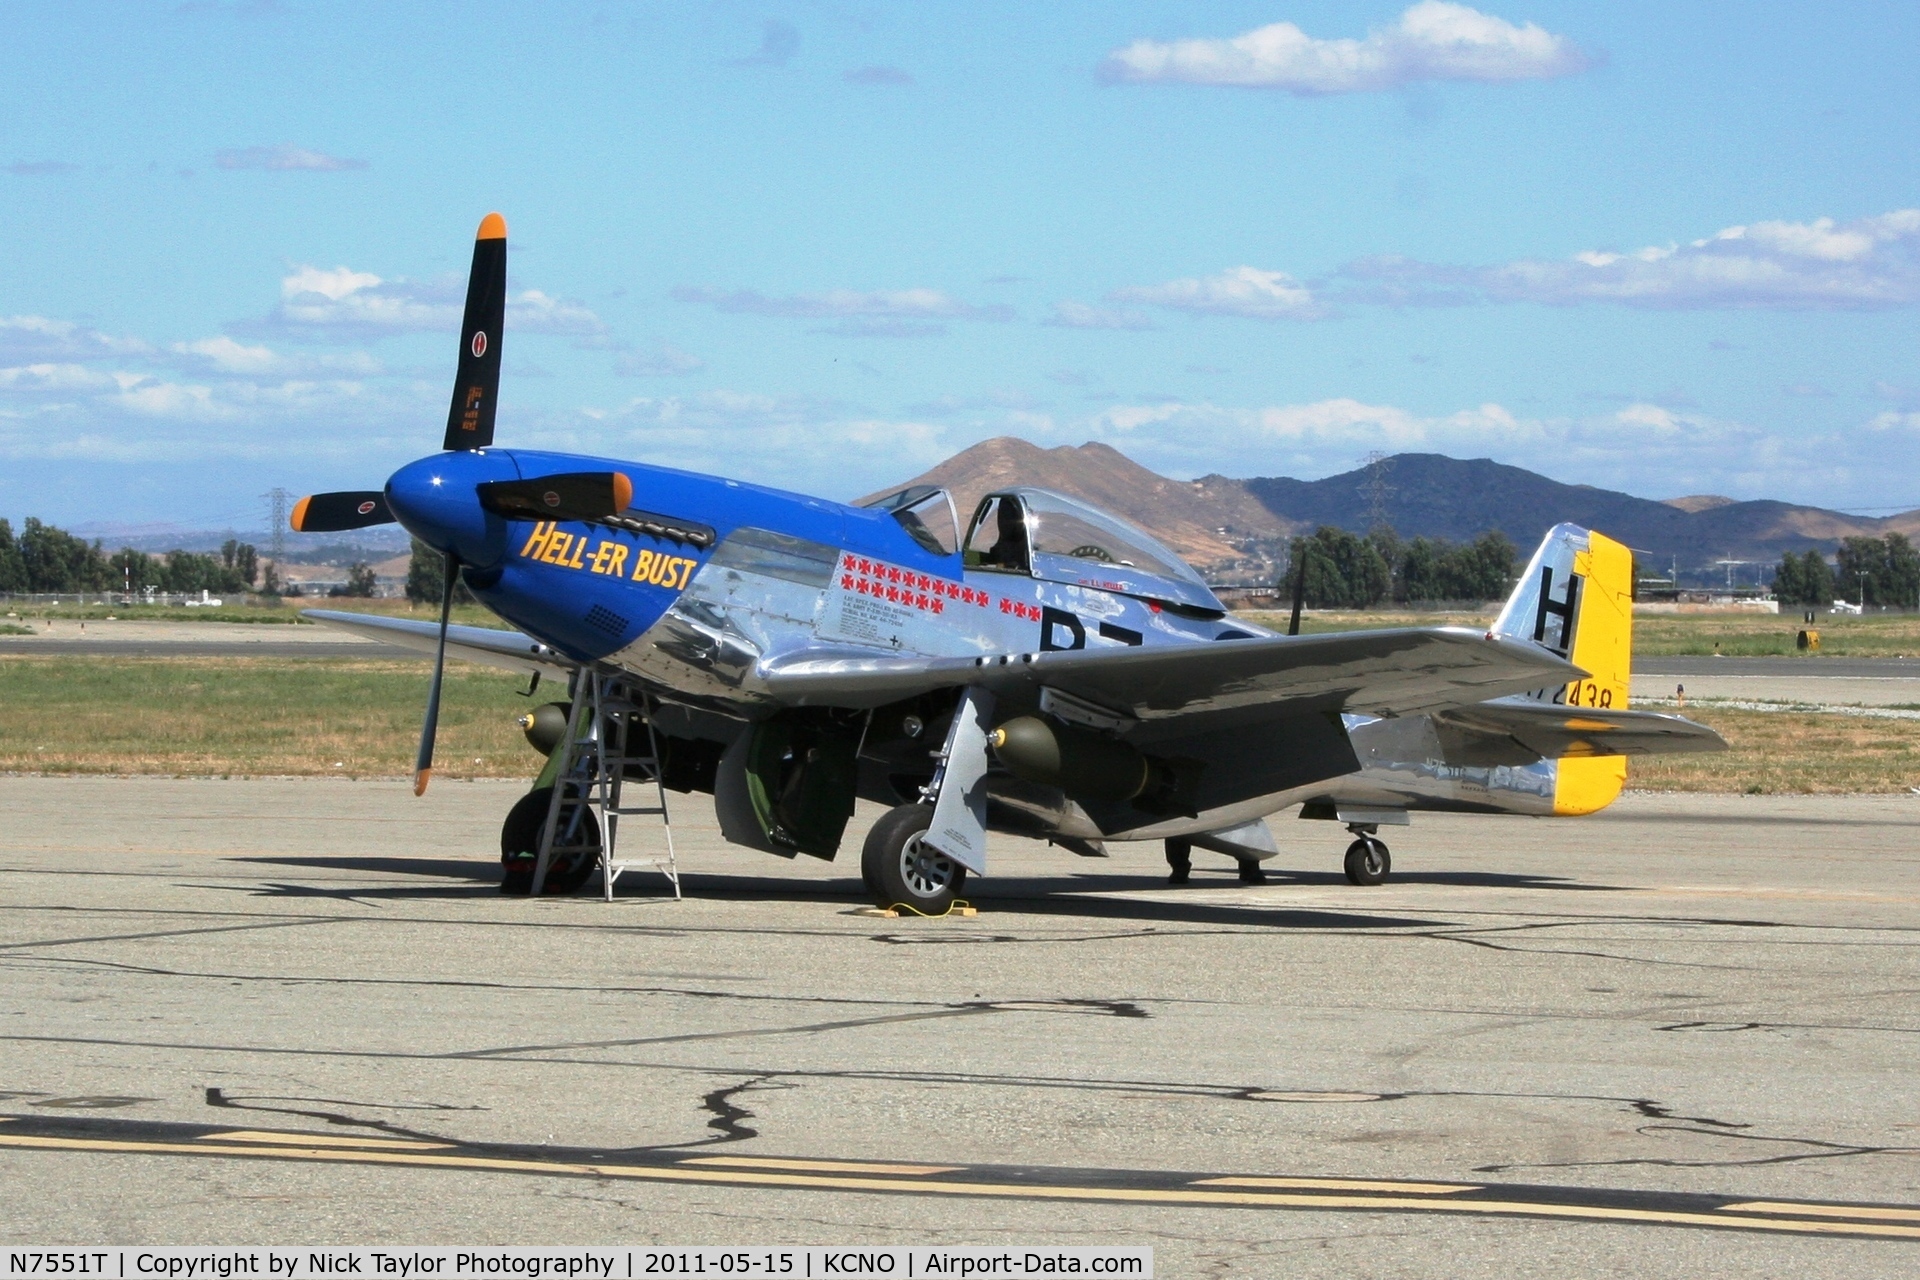 N7551T, 1944 North American P-51D Mustang C/N 122-38997, Hell-er Bust on display at the Planes of Fame Air Show